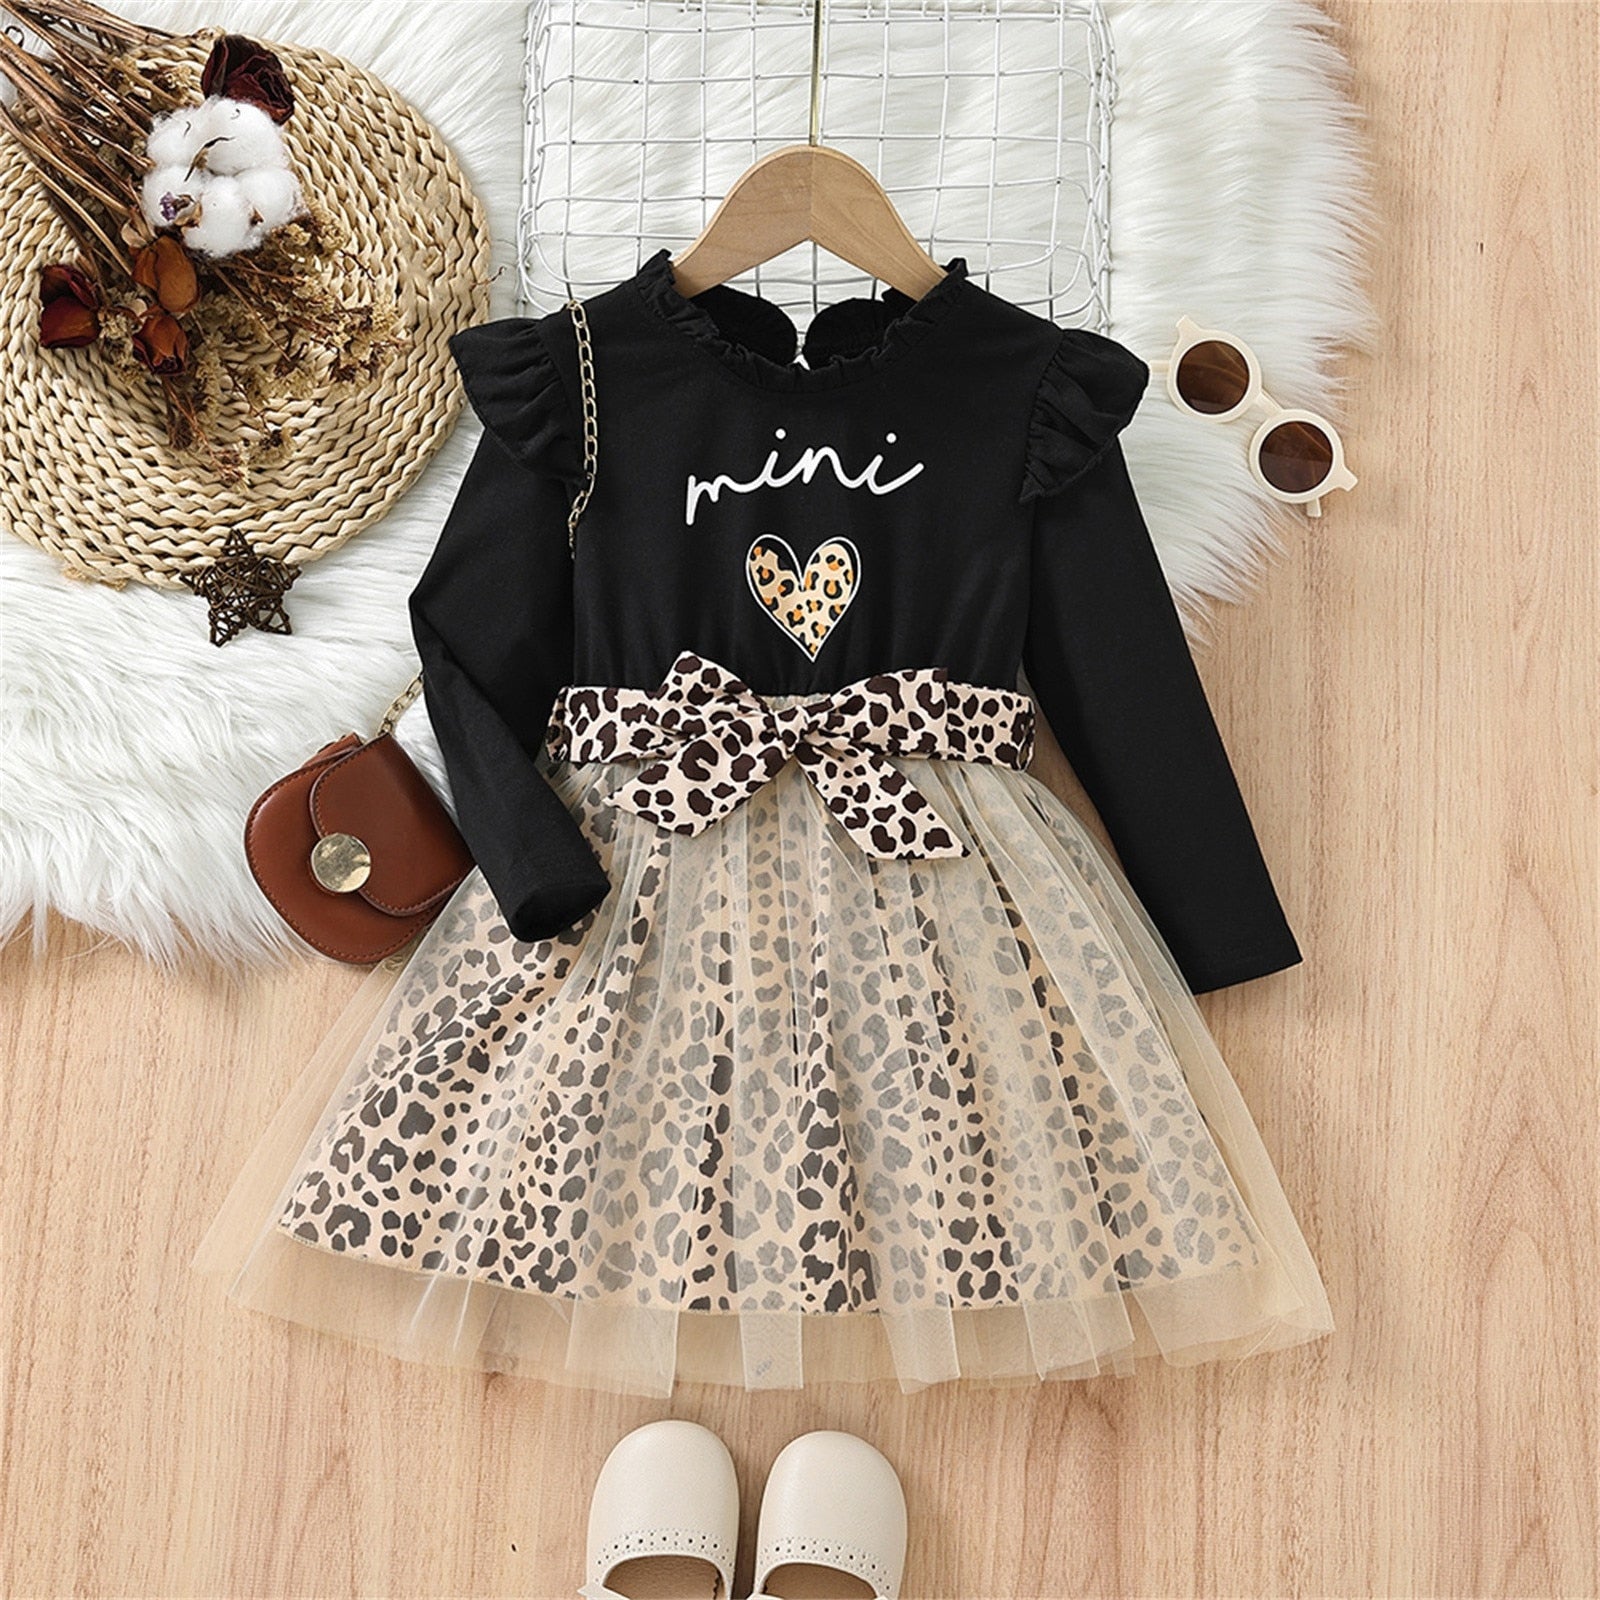 Stylish Girls Spring Summer Dress with Leopard Prints, Bowknot, and Mesh Princess Design